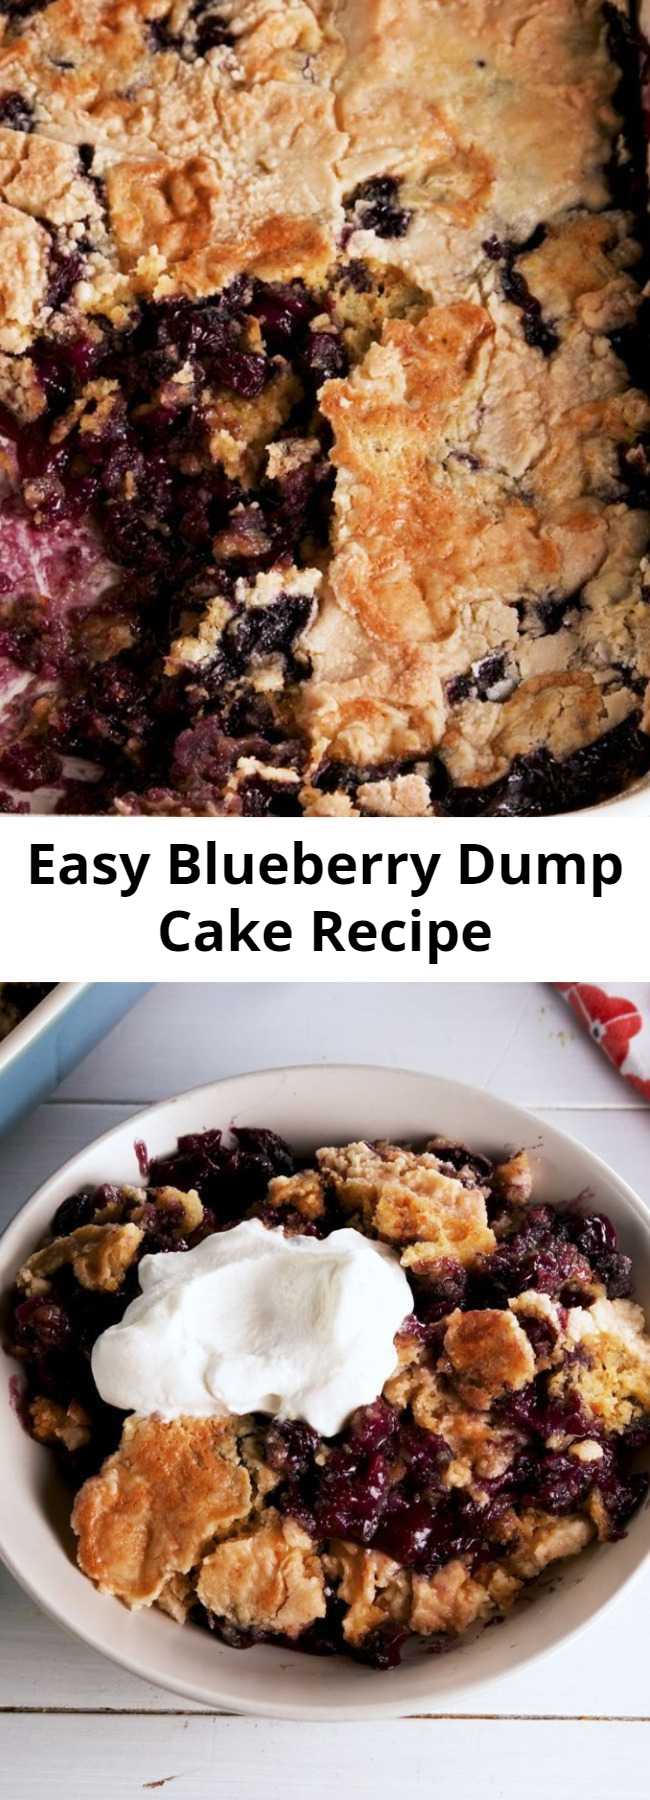 Easy Blueberry Dump Cake Recipe - This Blueberry Dump Cake is as easy as dumping a bunch of stuff into a bowl—but your guests will never know!